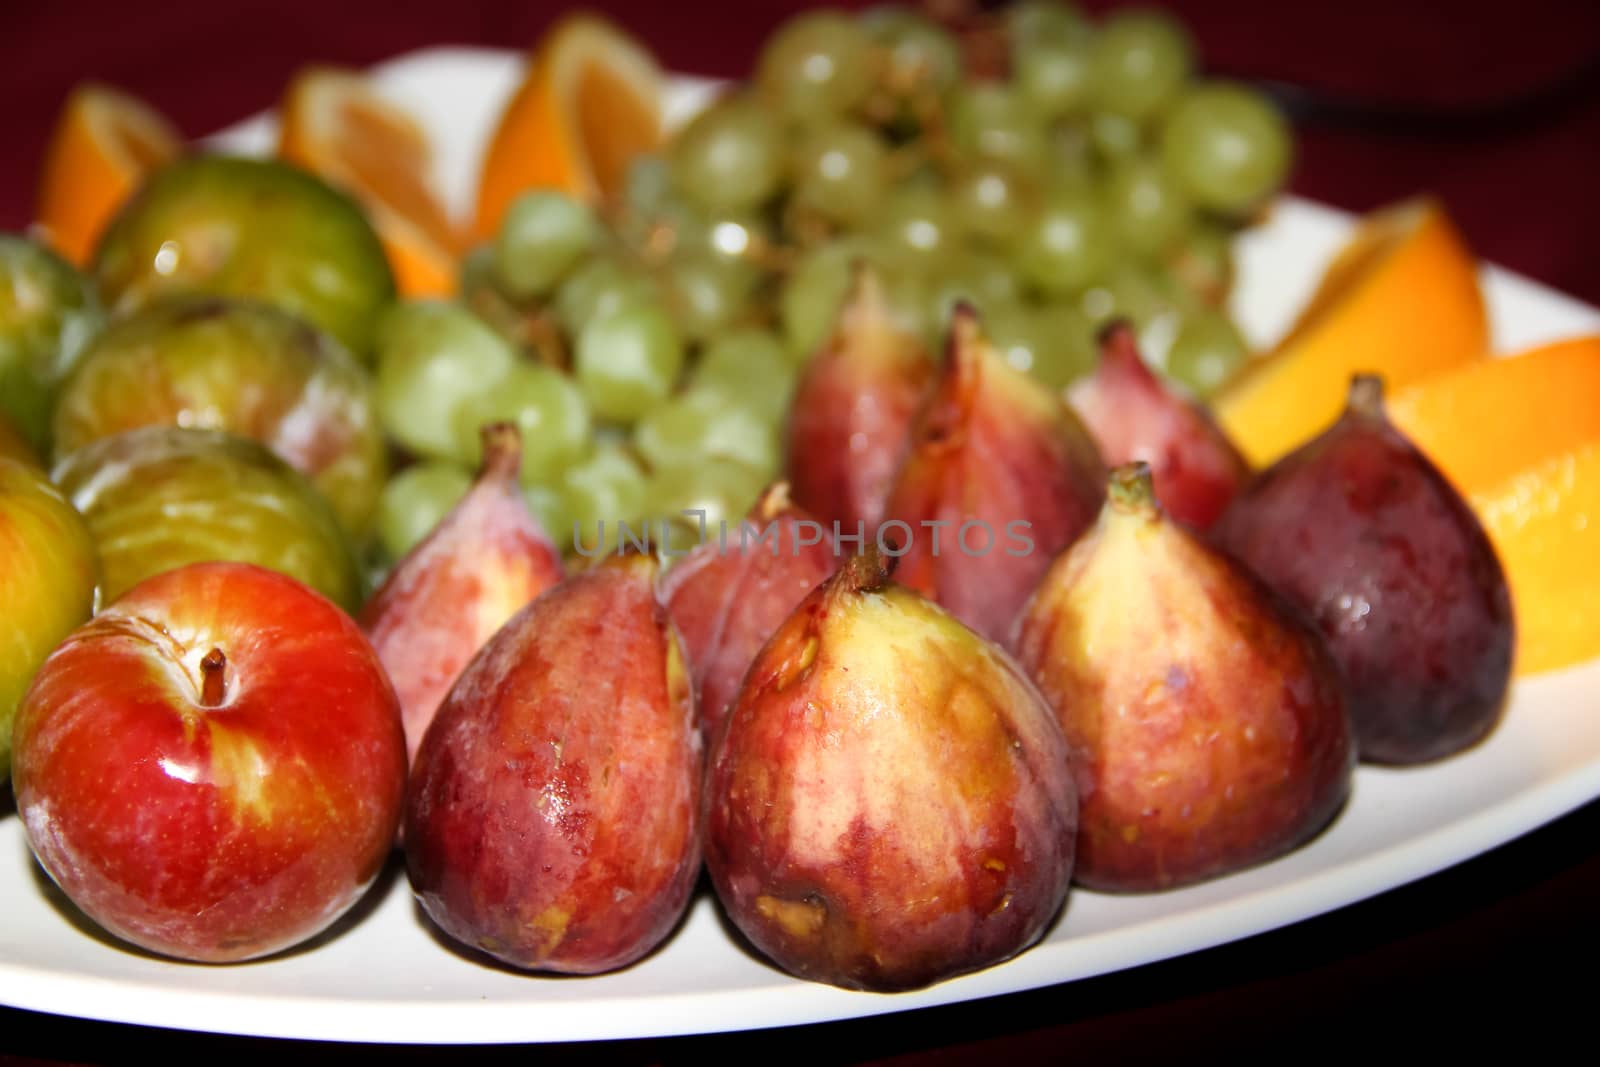 variety of fresh fruits served on a plate